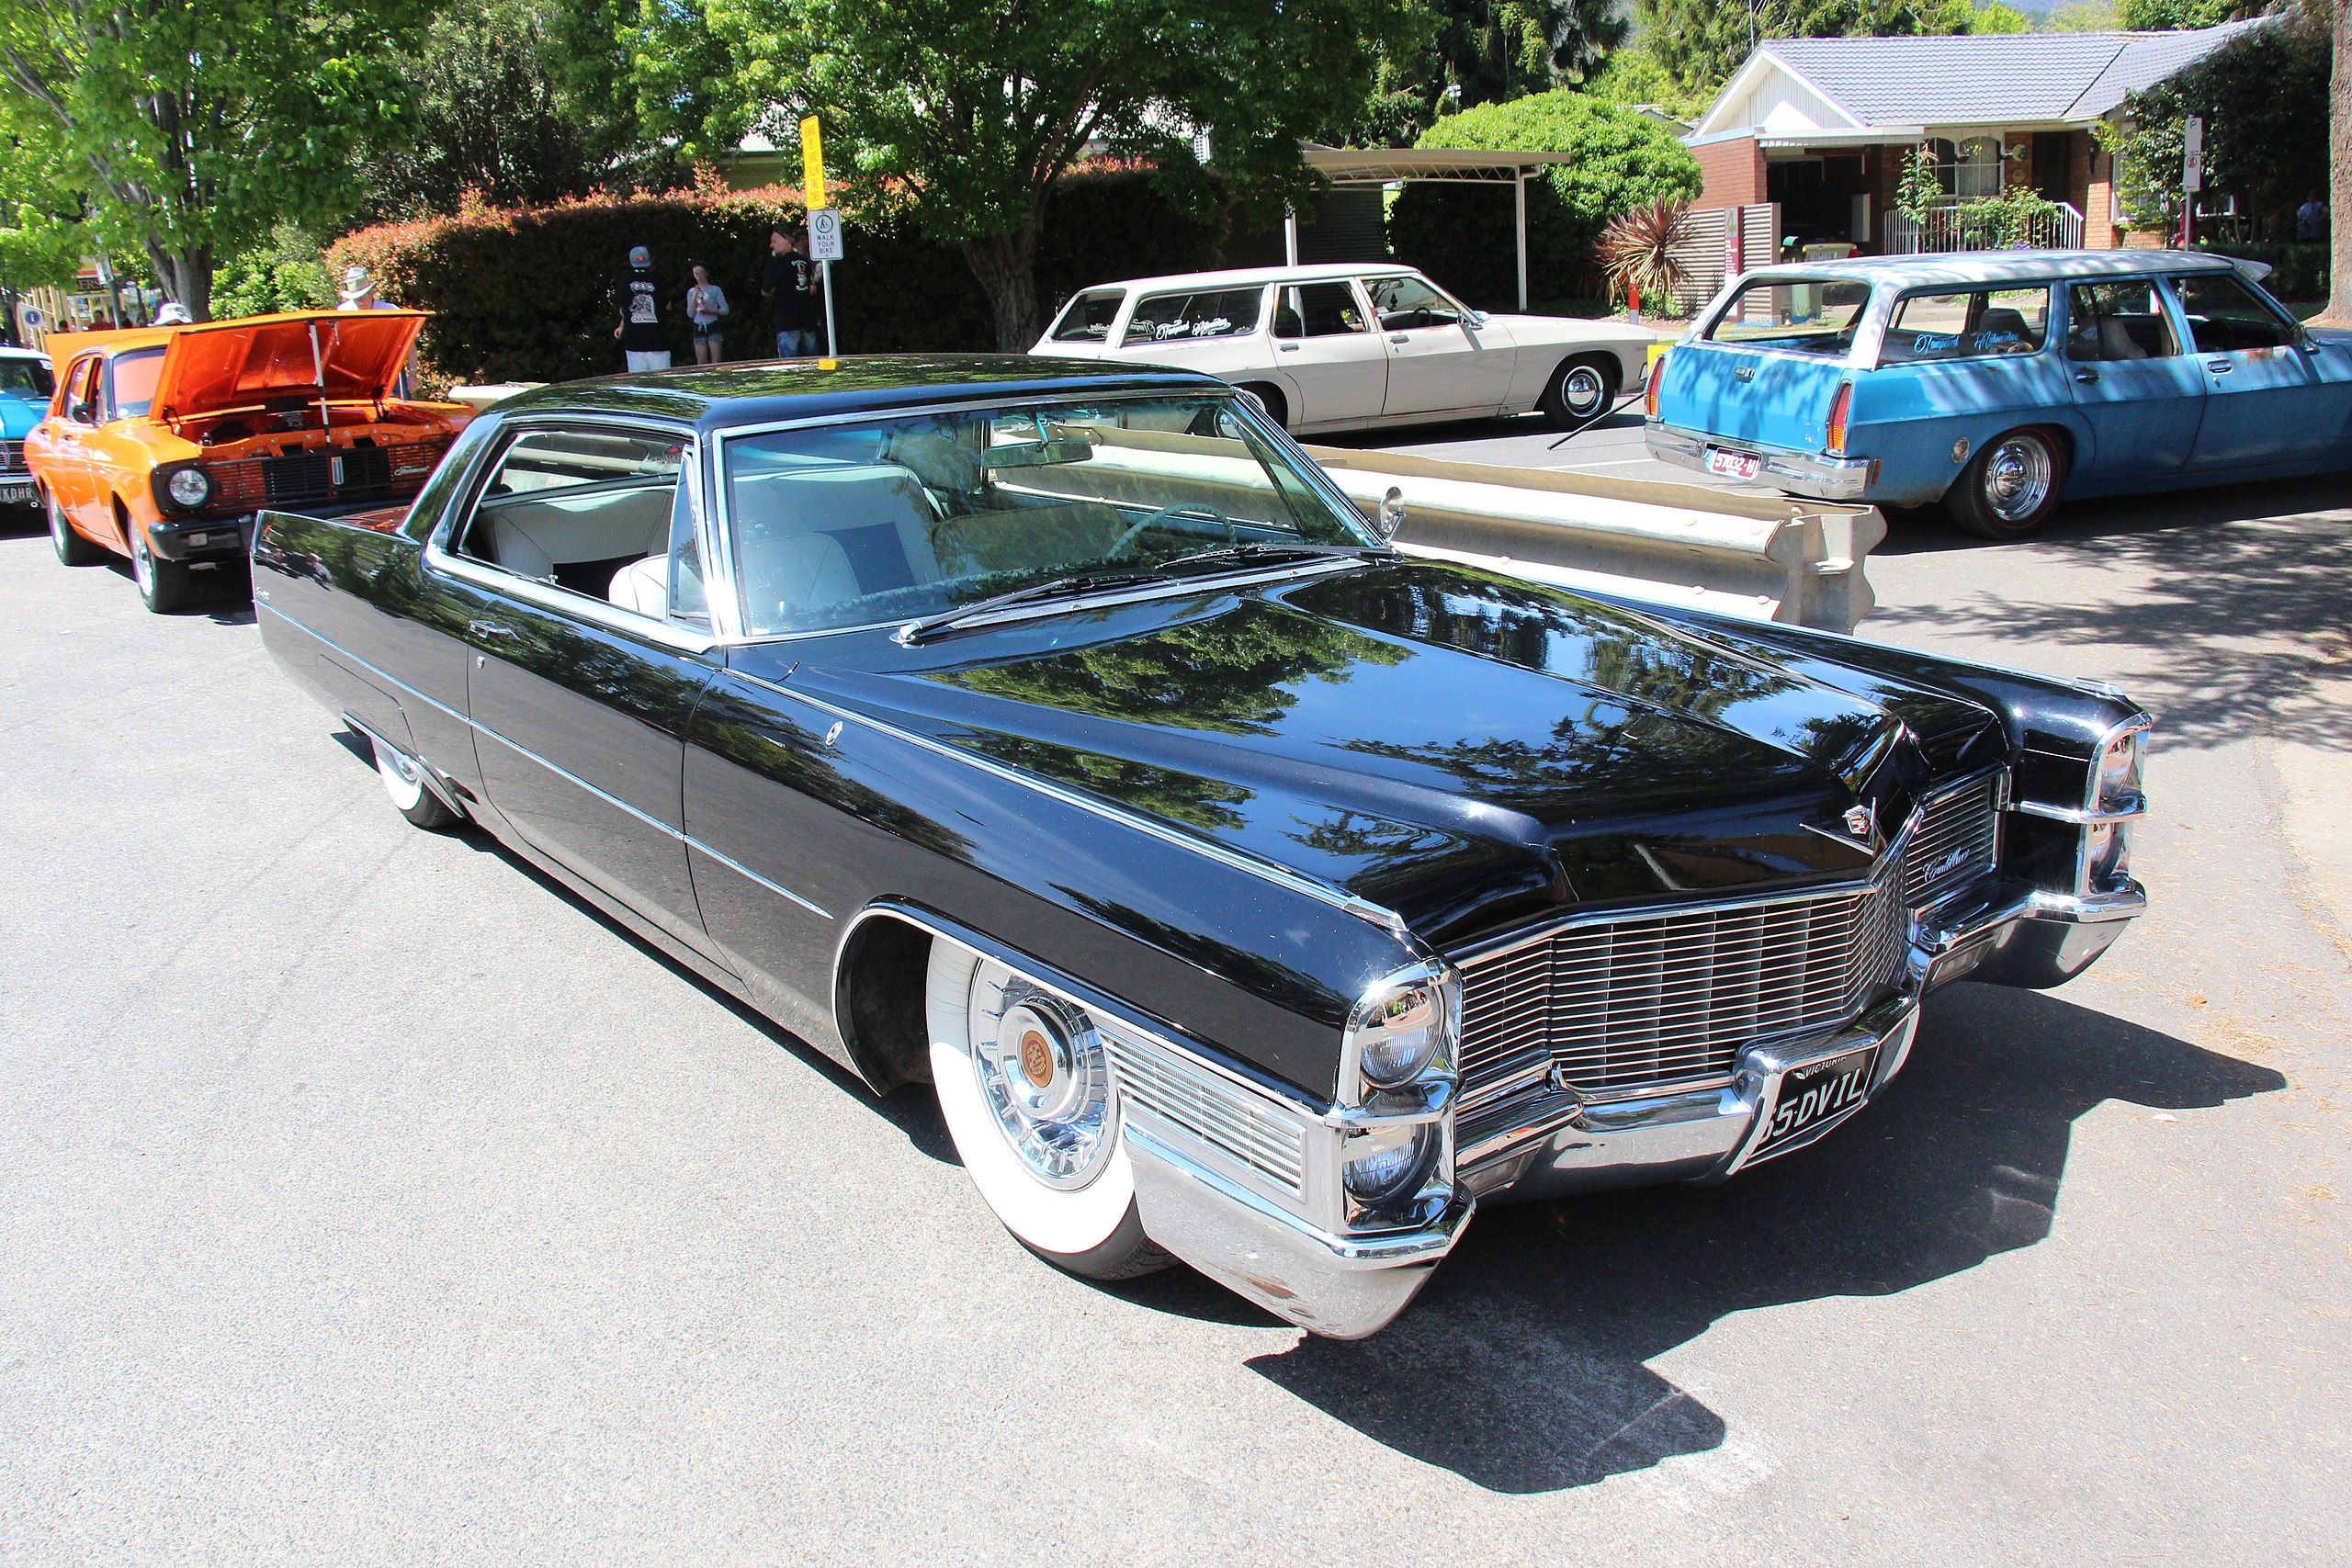 File:1965 Cadillac Coupe deVille (38474405302).jpg - Wikimedia Commons